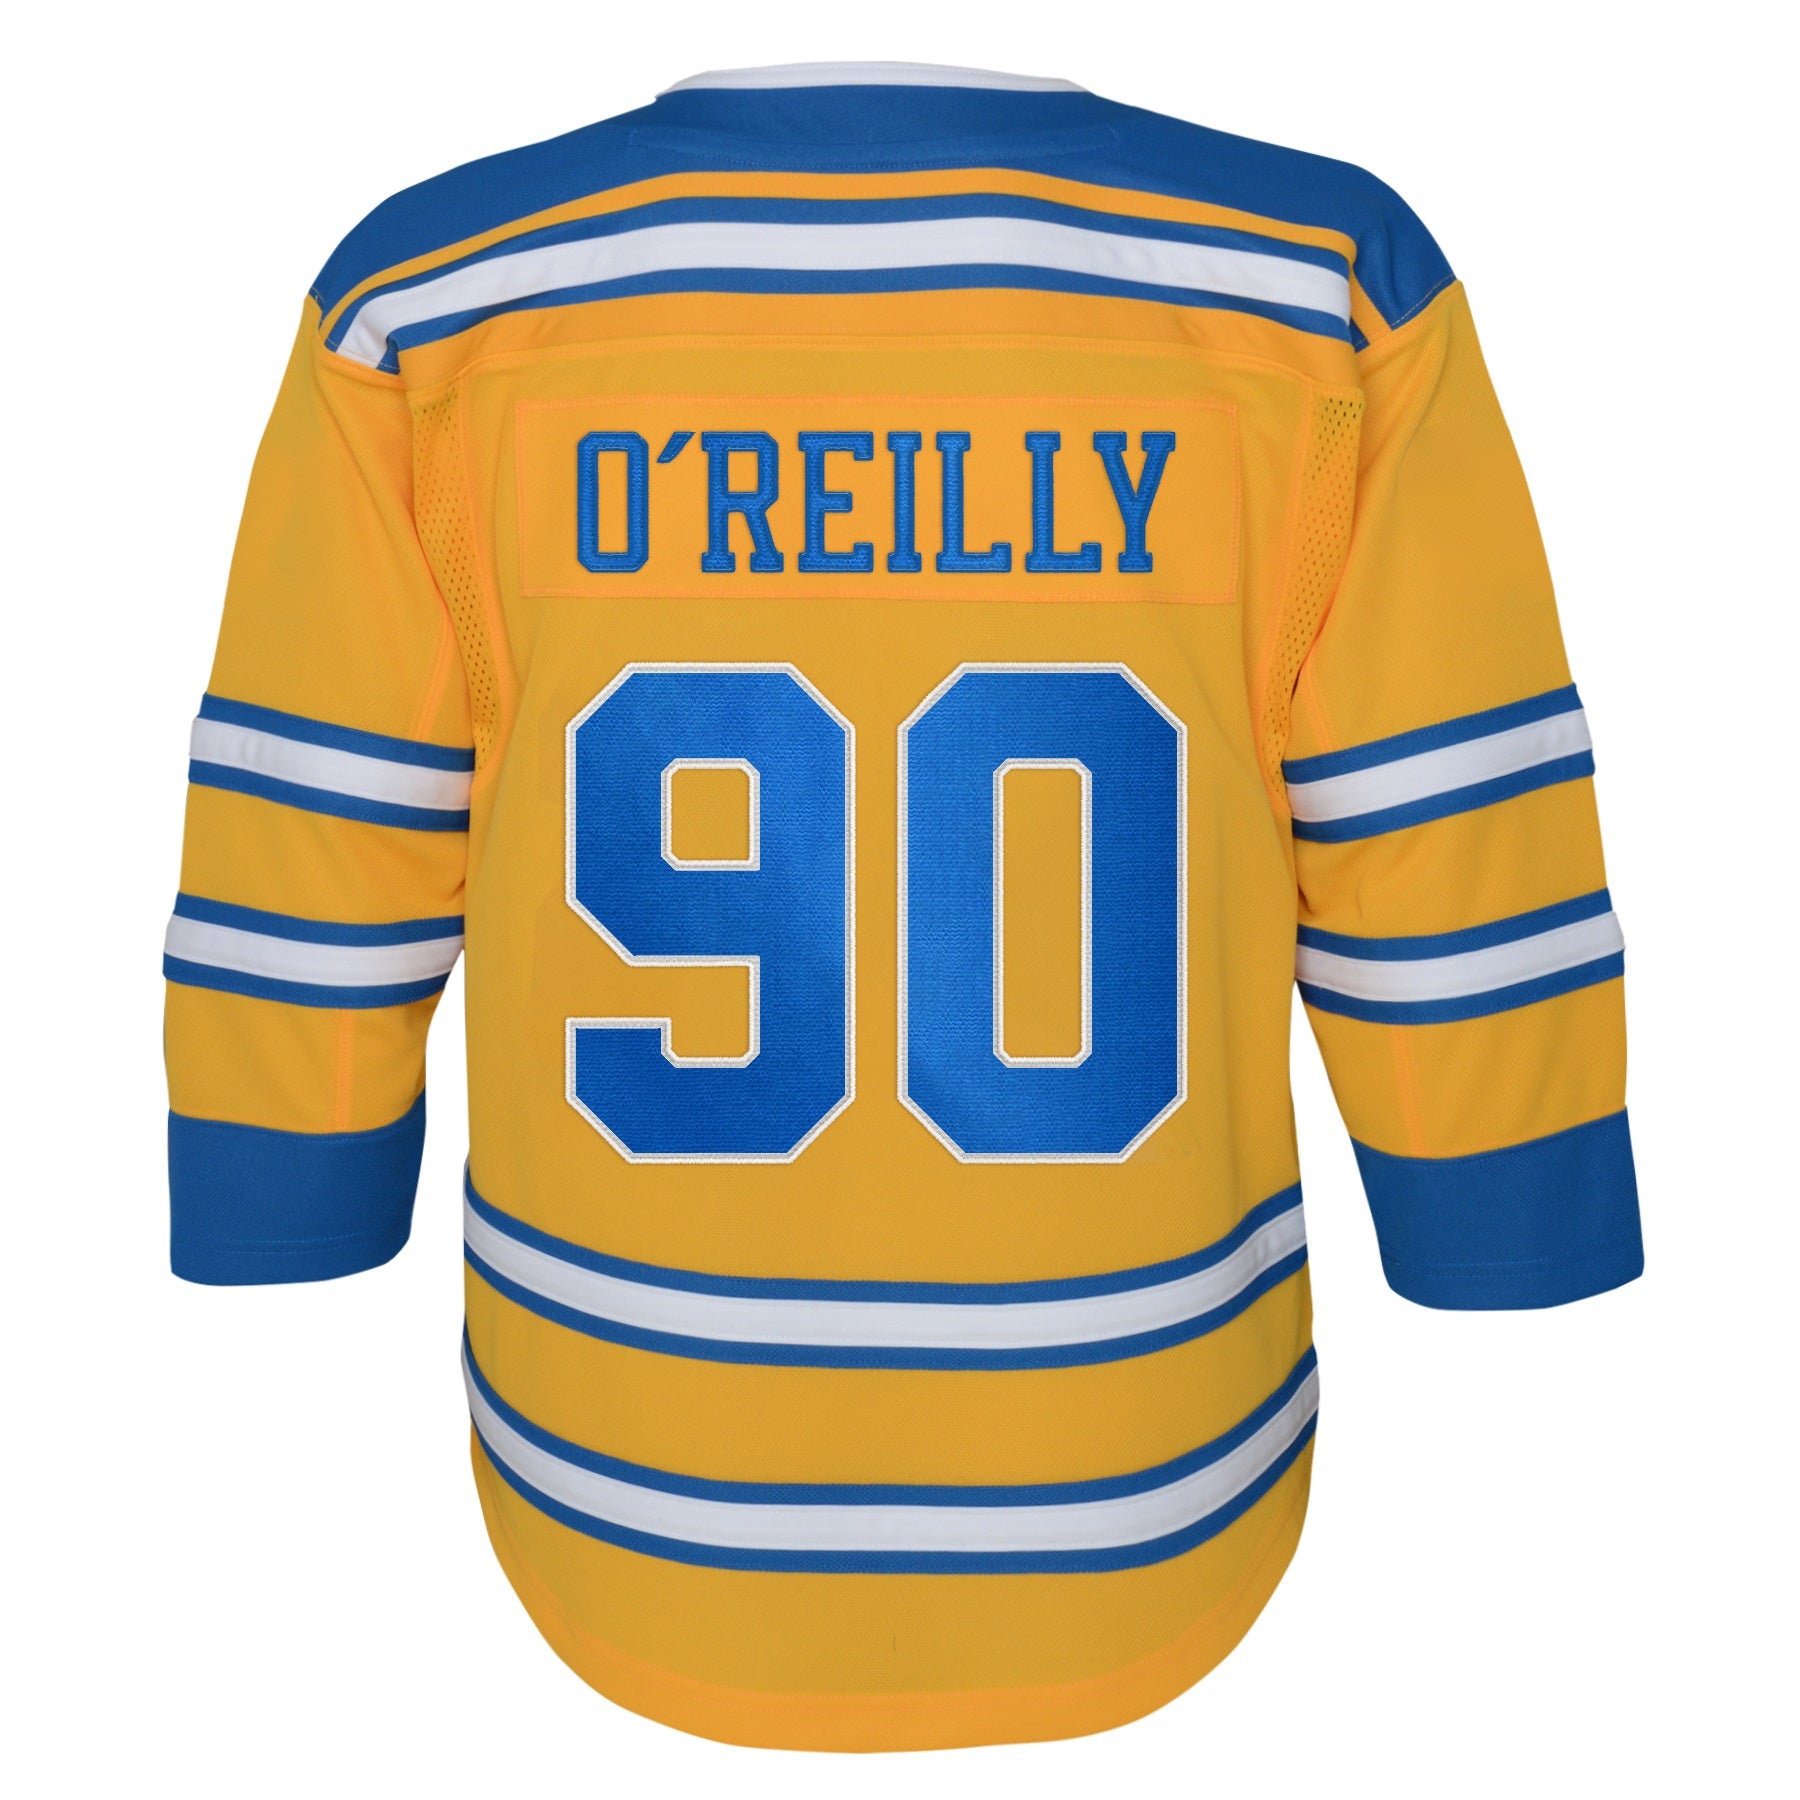 St. Louis Blues - Our first Winter Classic auction is now open. Items  include select game-worn jerseys (benefitting Blues for Kids) and Ryan O' Reilly's skates (benefitting Lydia's House). Text 'BLUES' to 76278